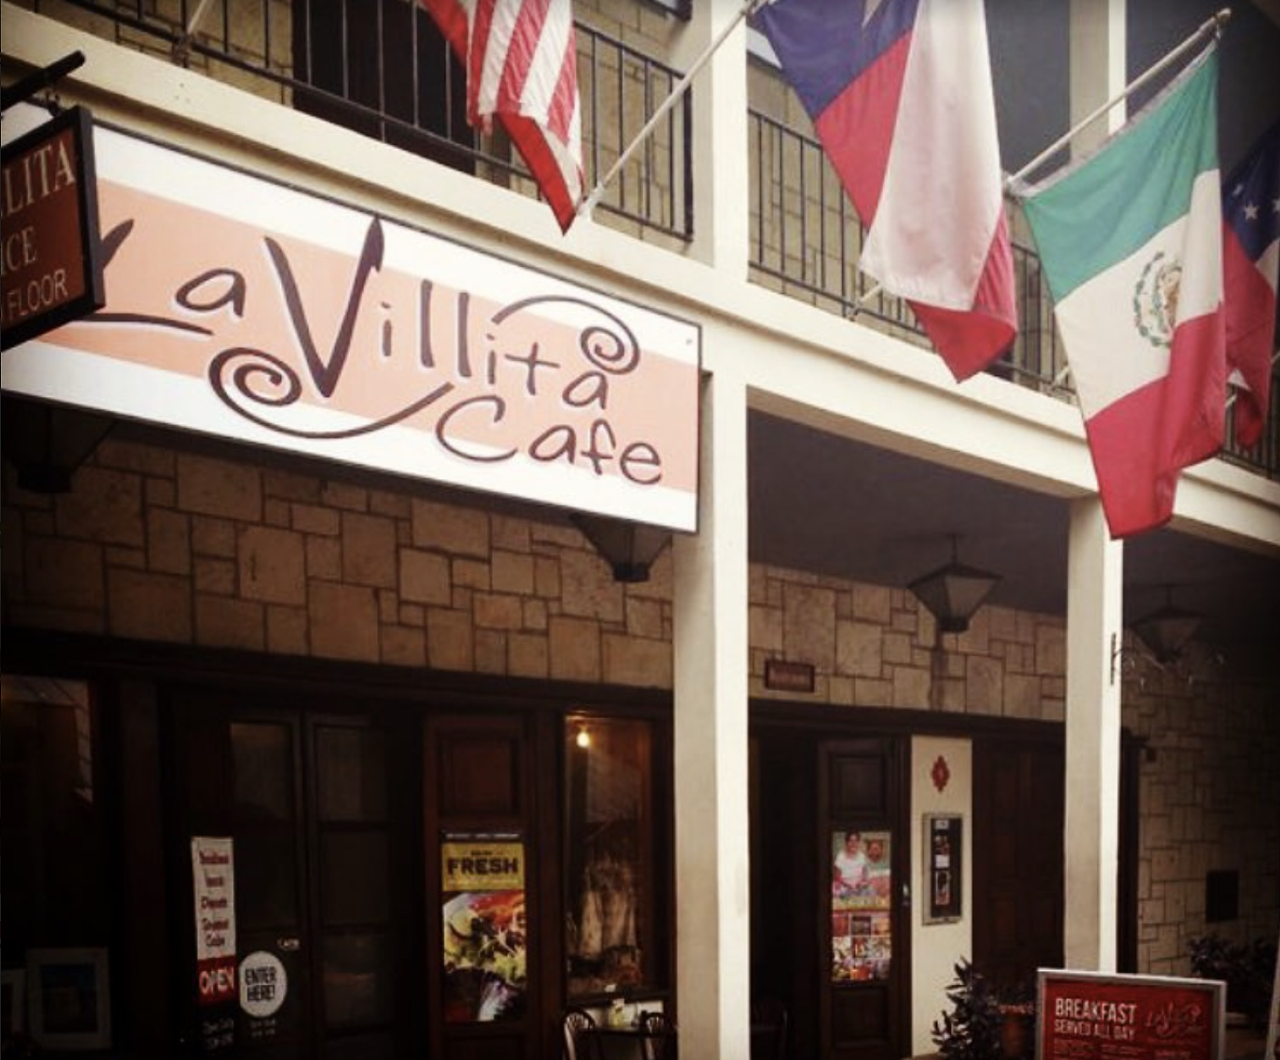 La Villita Cafe
418 Villita St., (210) 223-4700, lavillitacafe.com
Enjoy freshly-made pastries, breakfast tacos or an omelette plate at this Downtown spot. Plus, daily specials (both happy hour and all-day) will make your visit all the more worthwhile.
Photo via Instagram / la_villita_cafe